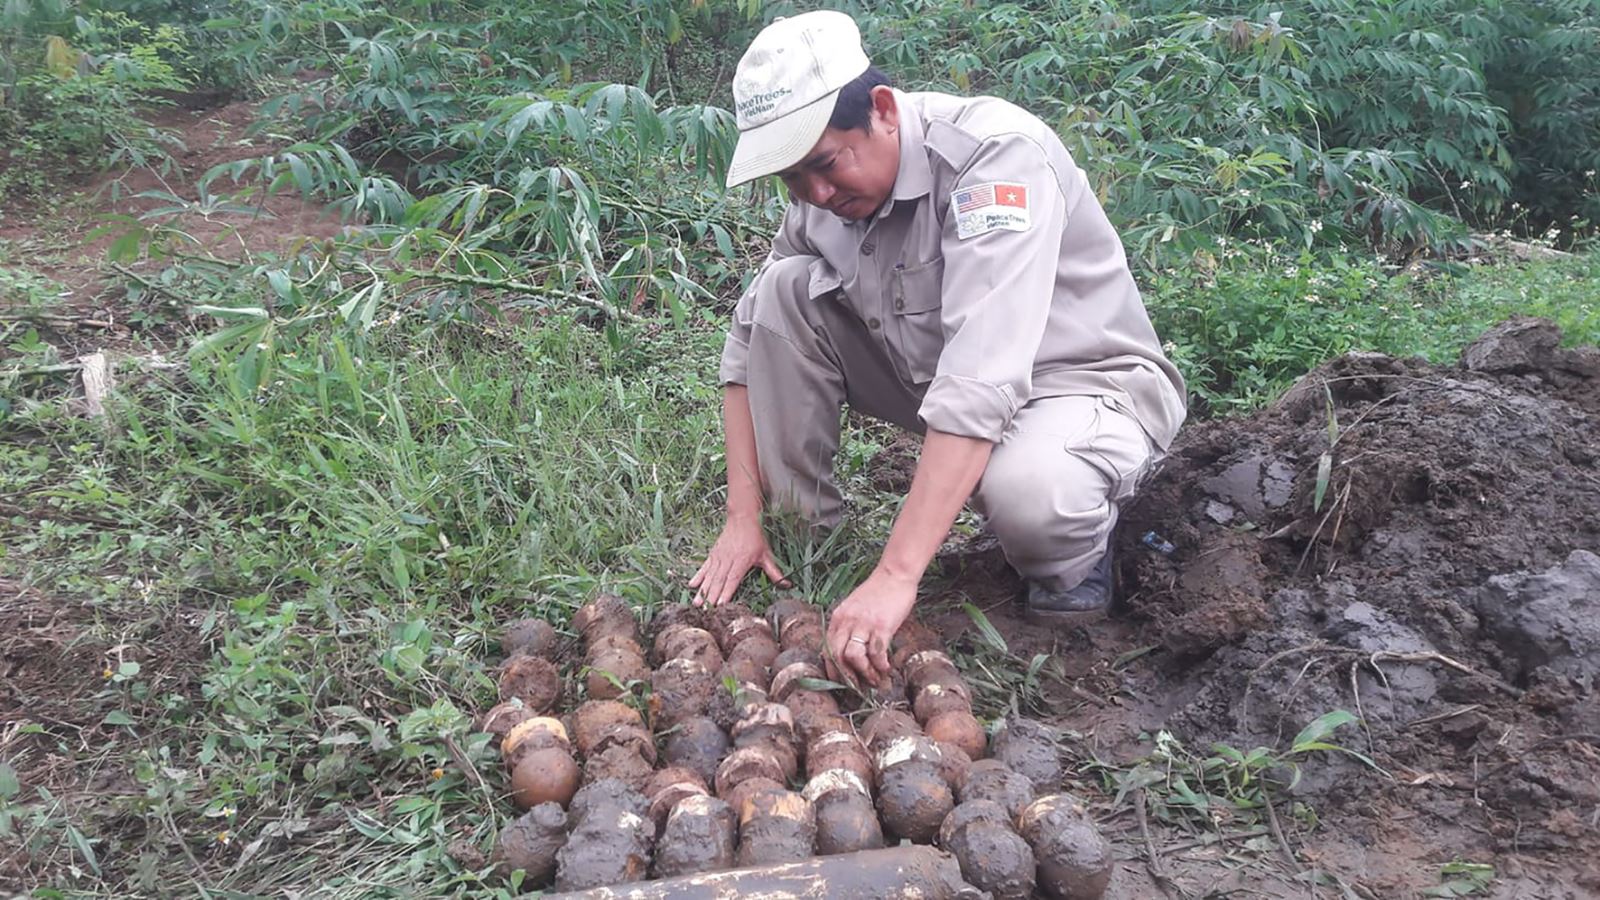 Quang Tri: 300 explosive devices safely destroyed by PeaceTrees’ team